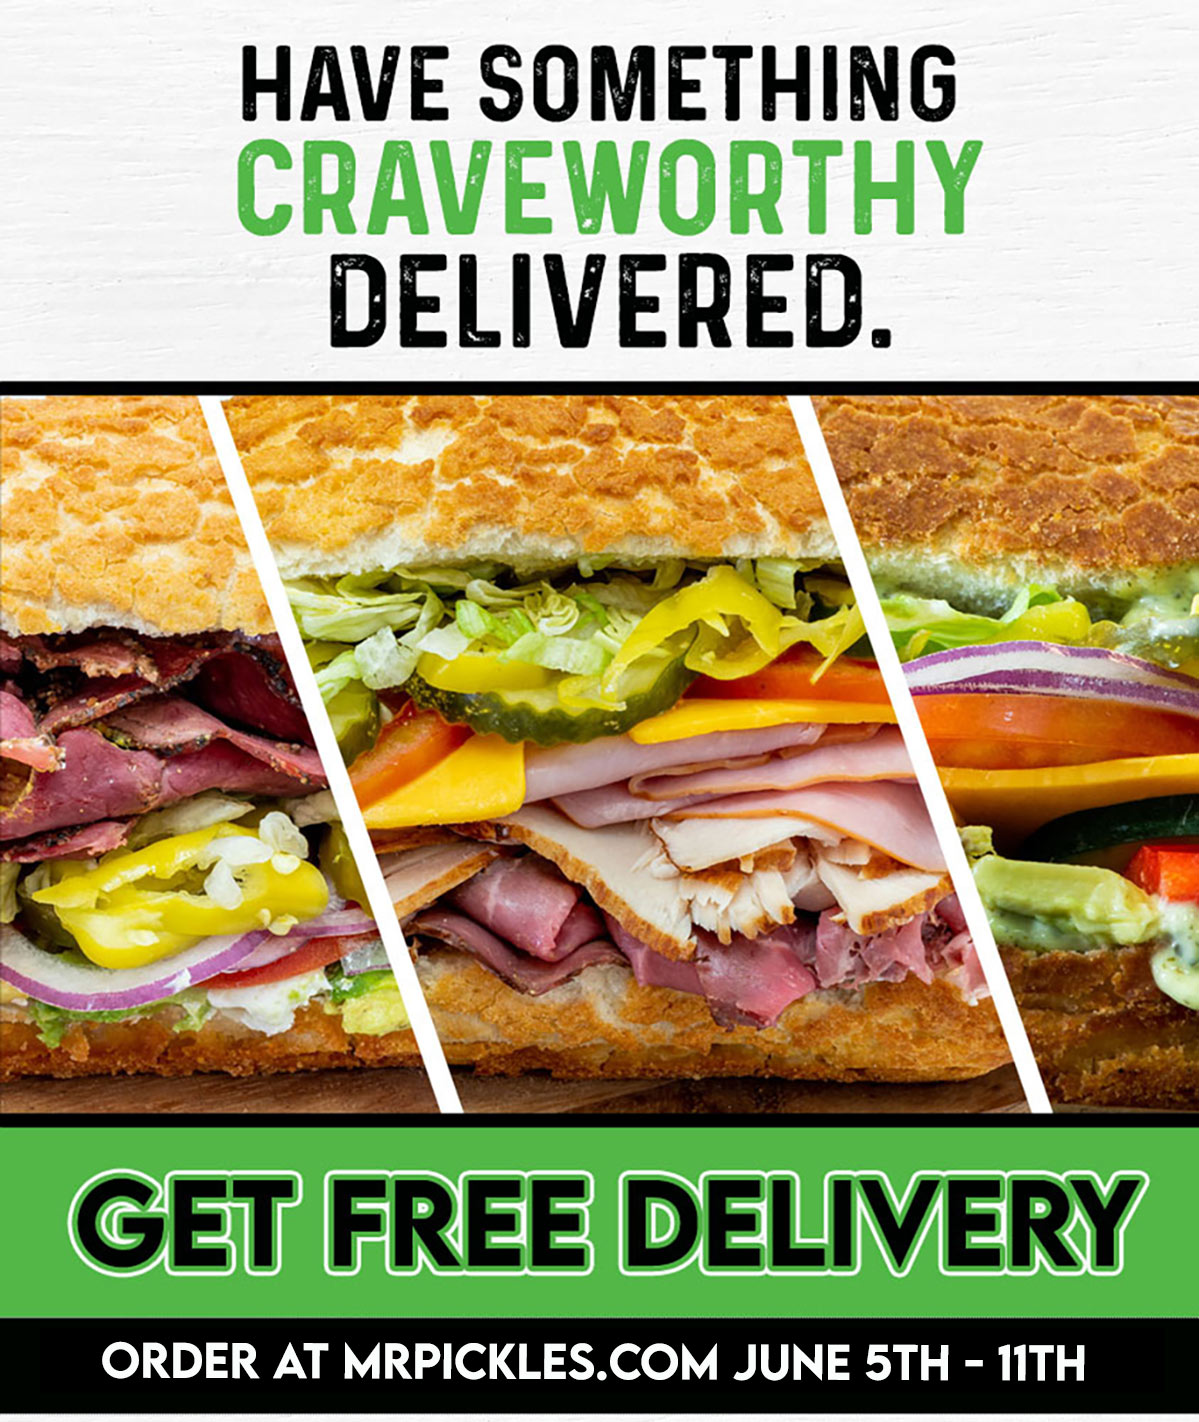 Get Free Delivery until June 11th Order now!